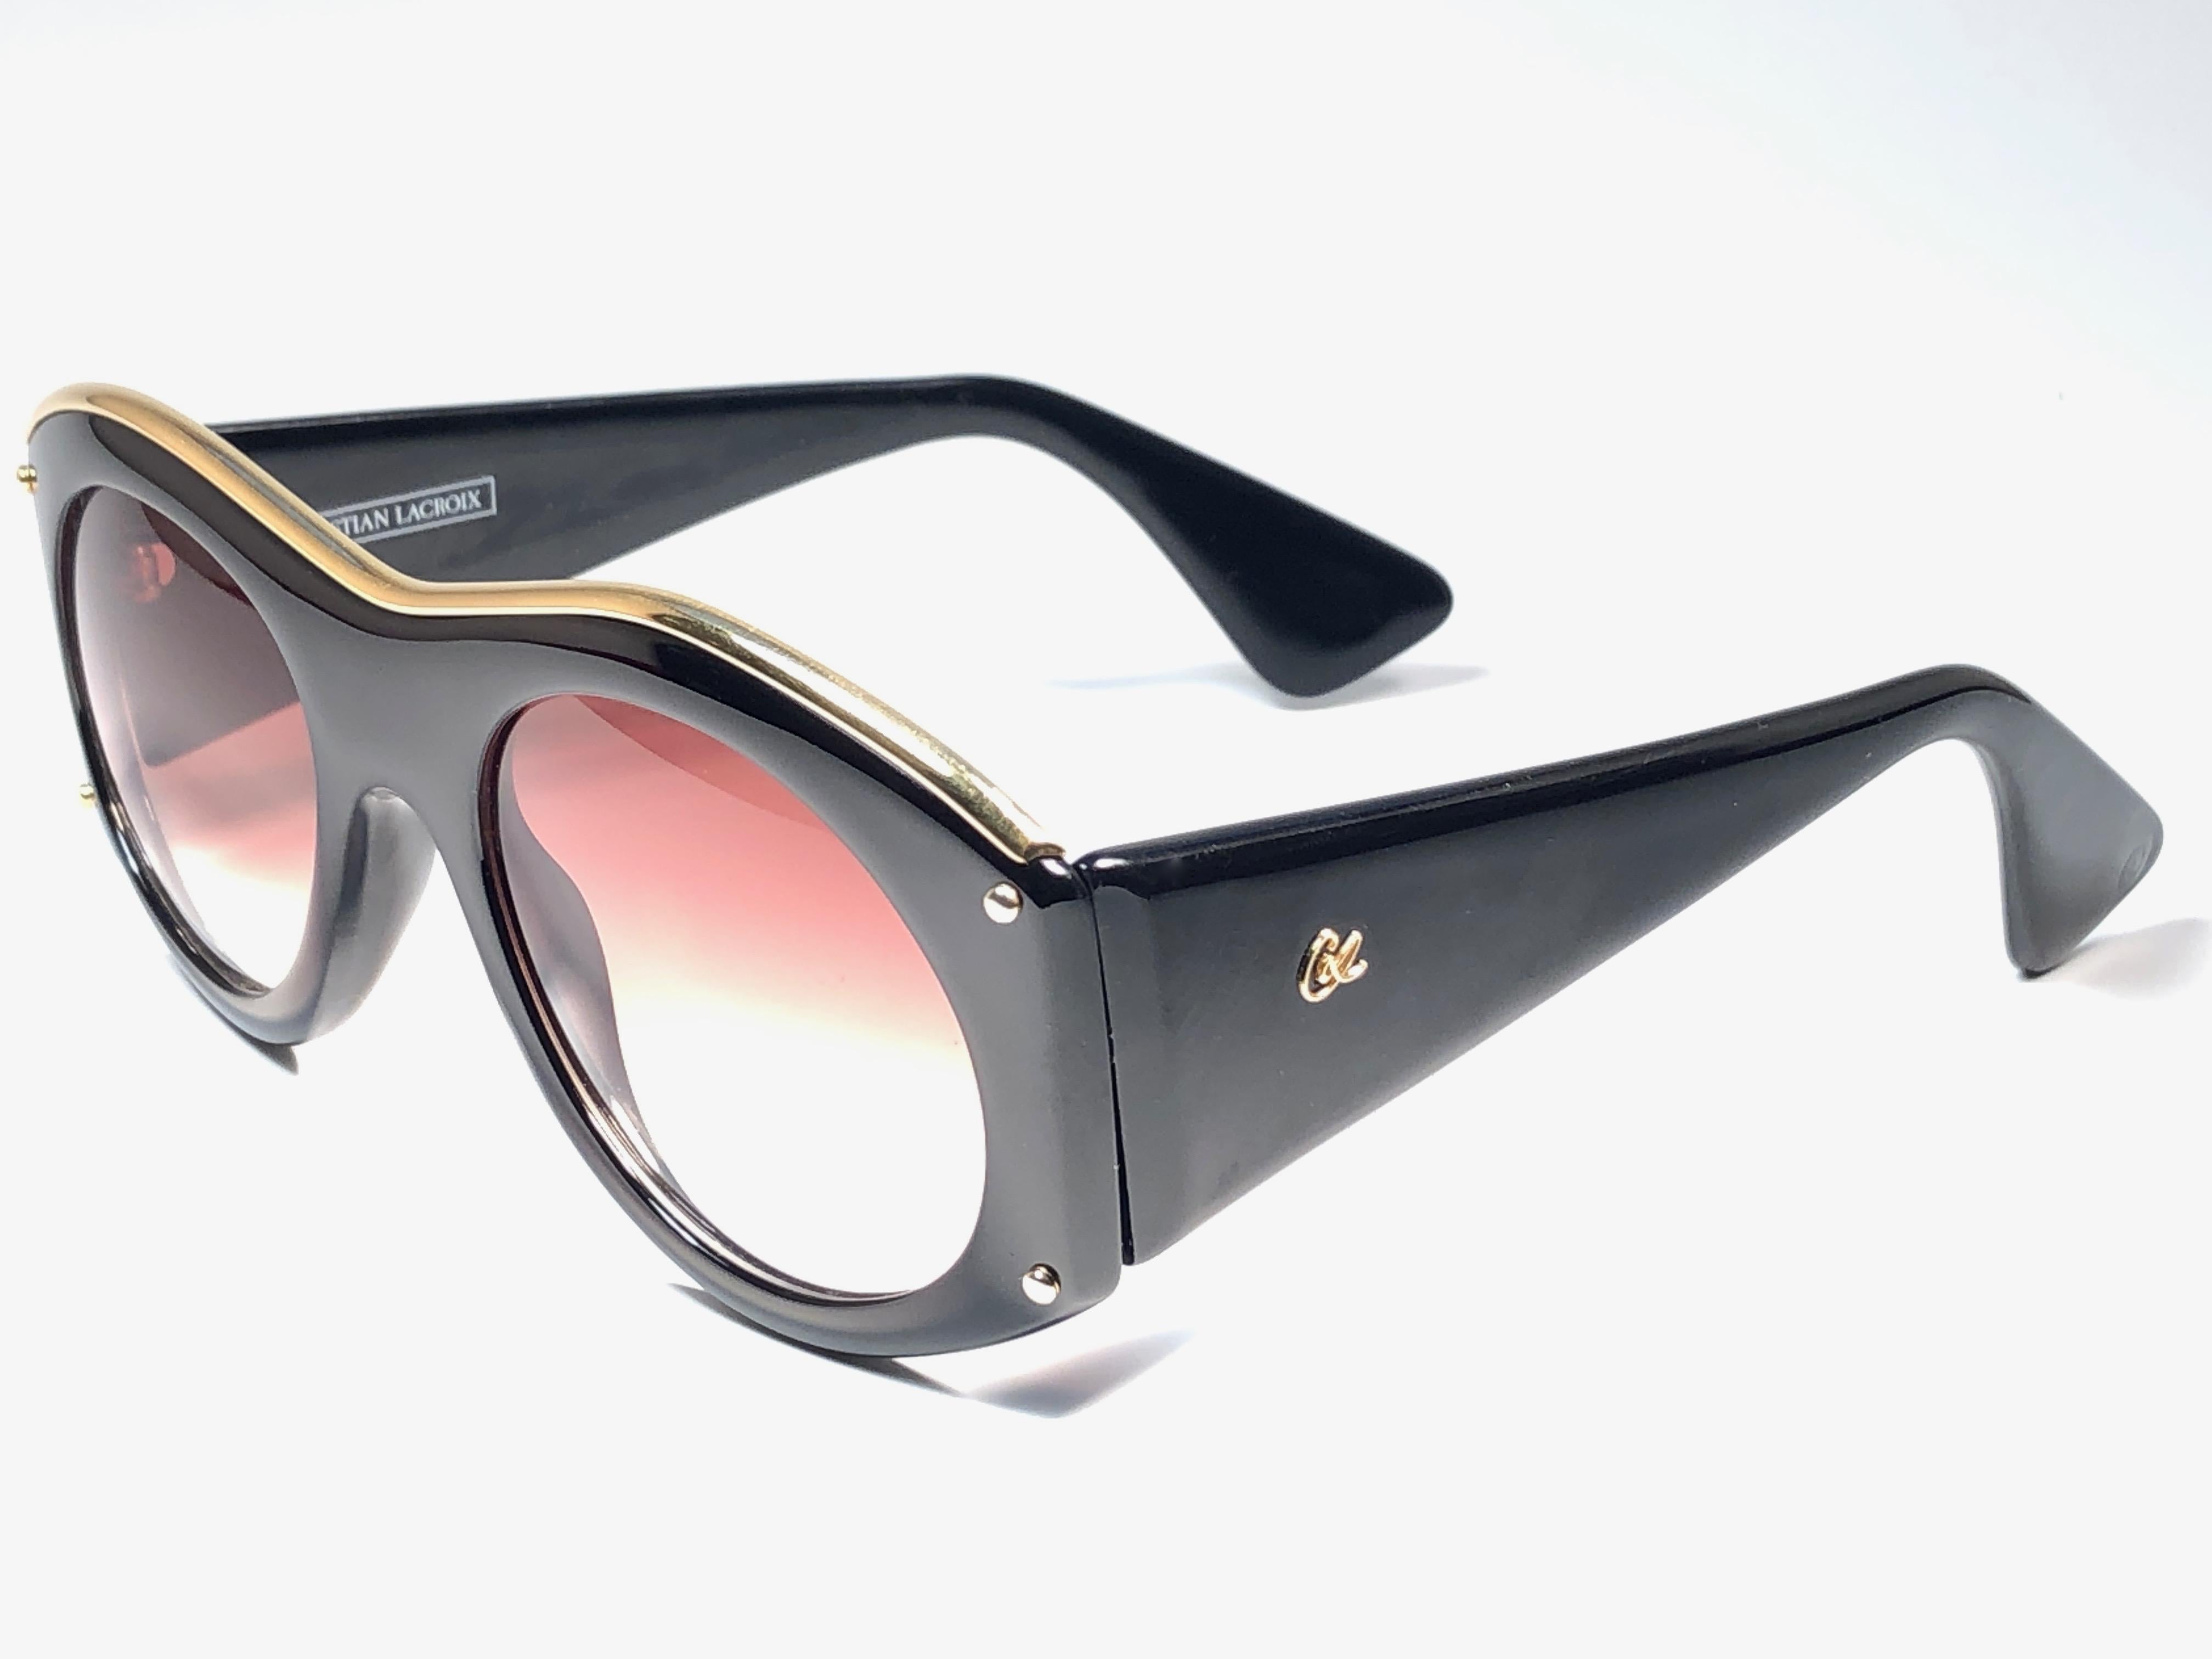 Rare pair of New vintage Christian Lacroix sunglasses.   

Black & gold frame holding a pair of spotless brown gradient lenses. 

New, never worn or displayed. 

Made in France.